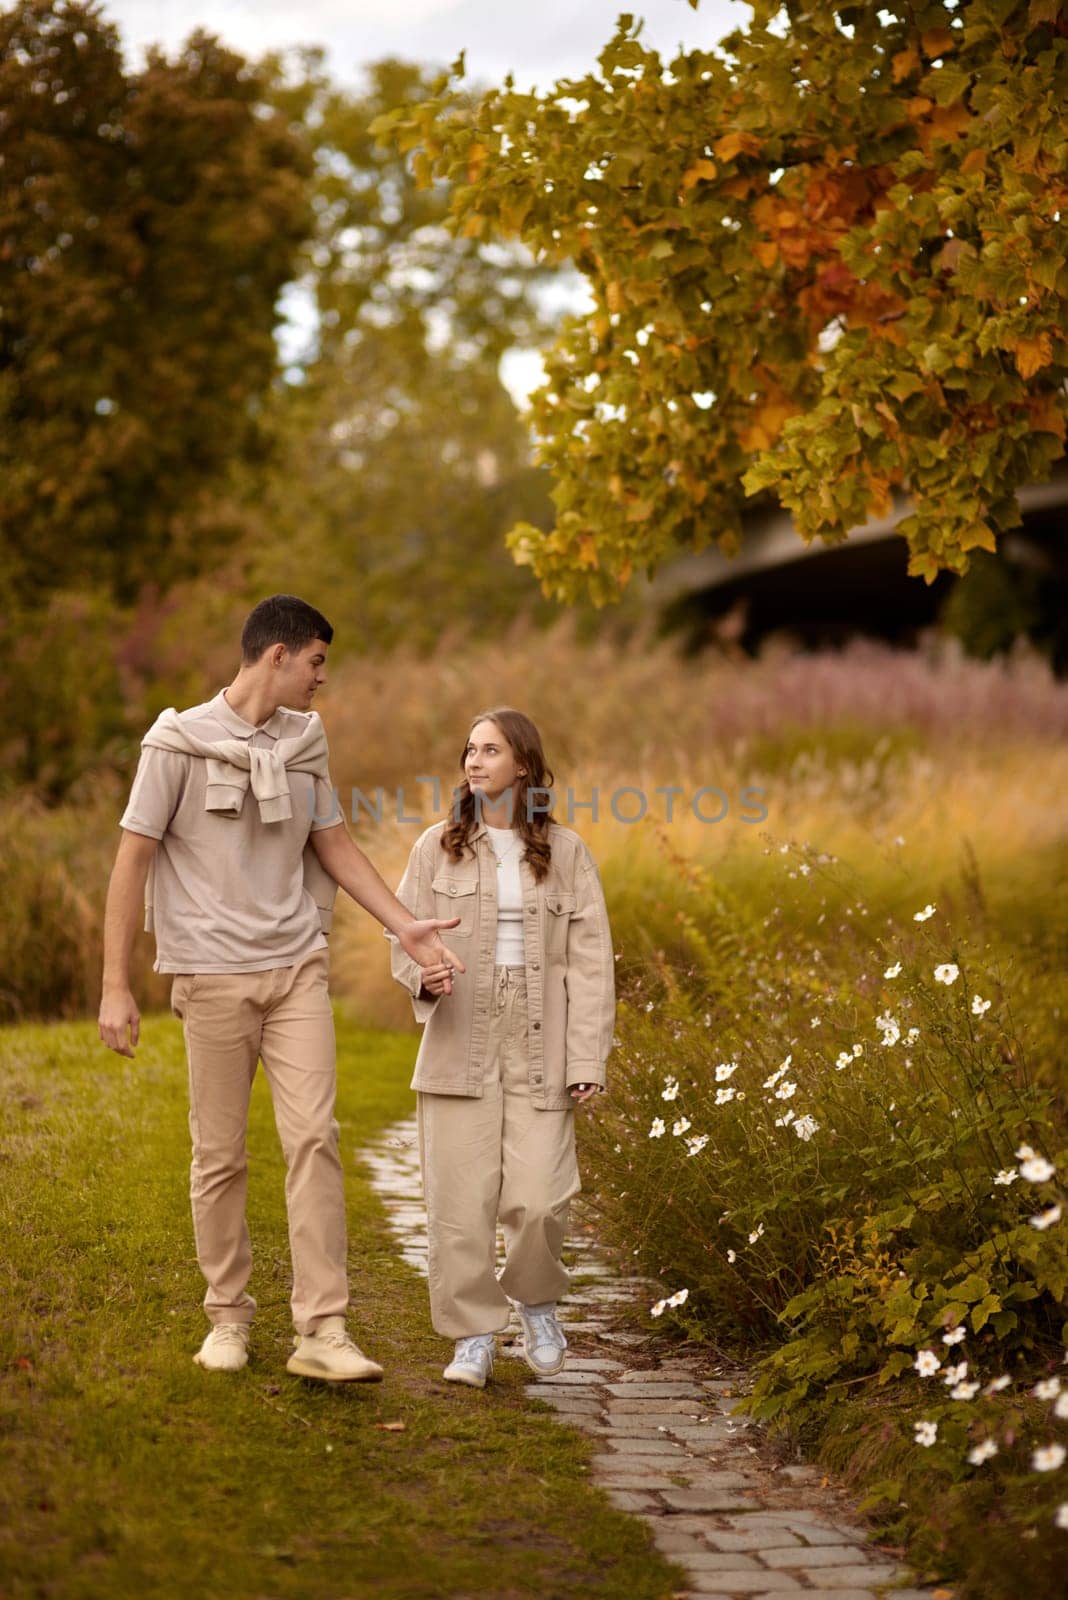 Young Cute Female Hugs Boyfriend. In Autumn Outdoor. Lovers Walking in Park. Attractive Funny Couple. Lovestory in Forest. Man and Woman. Cute Lovers in the Park. Family Concept. Happy Couple.